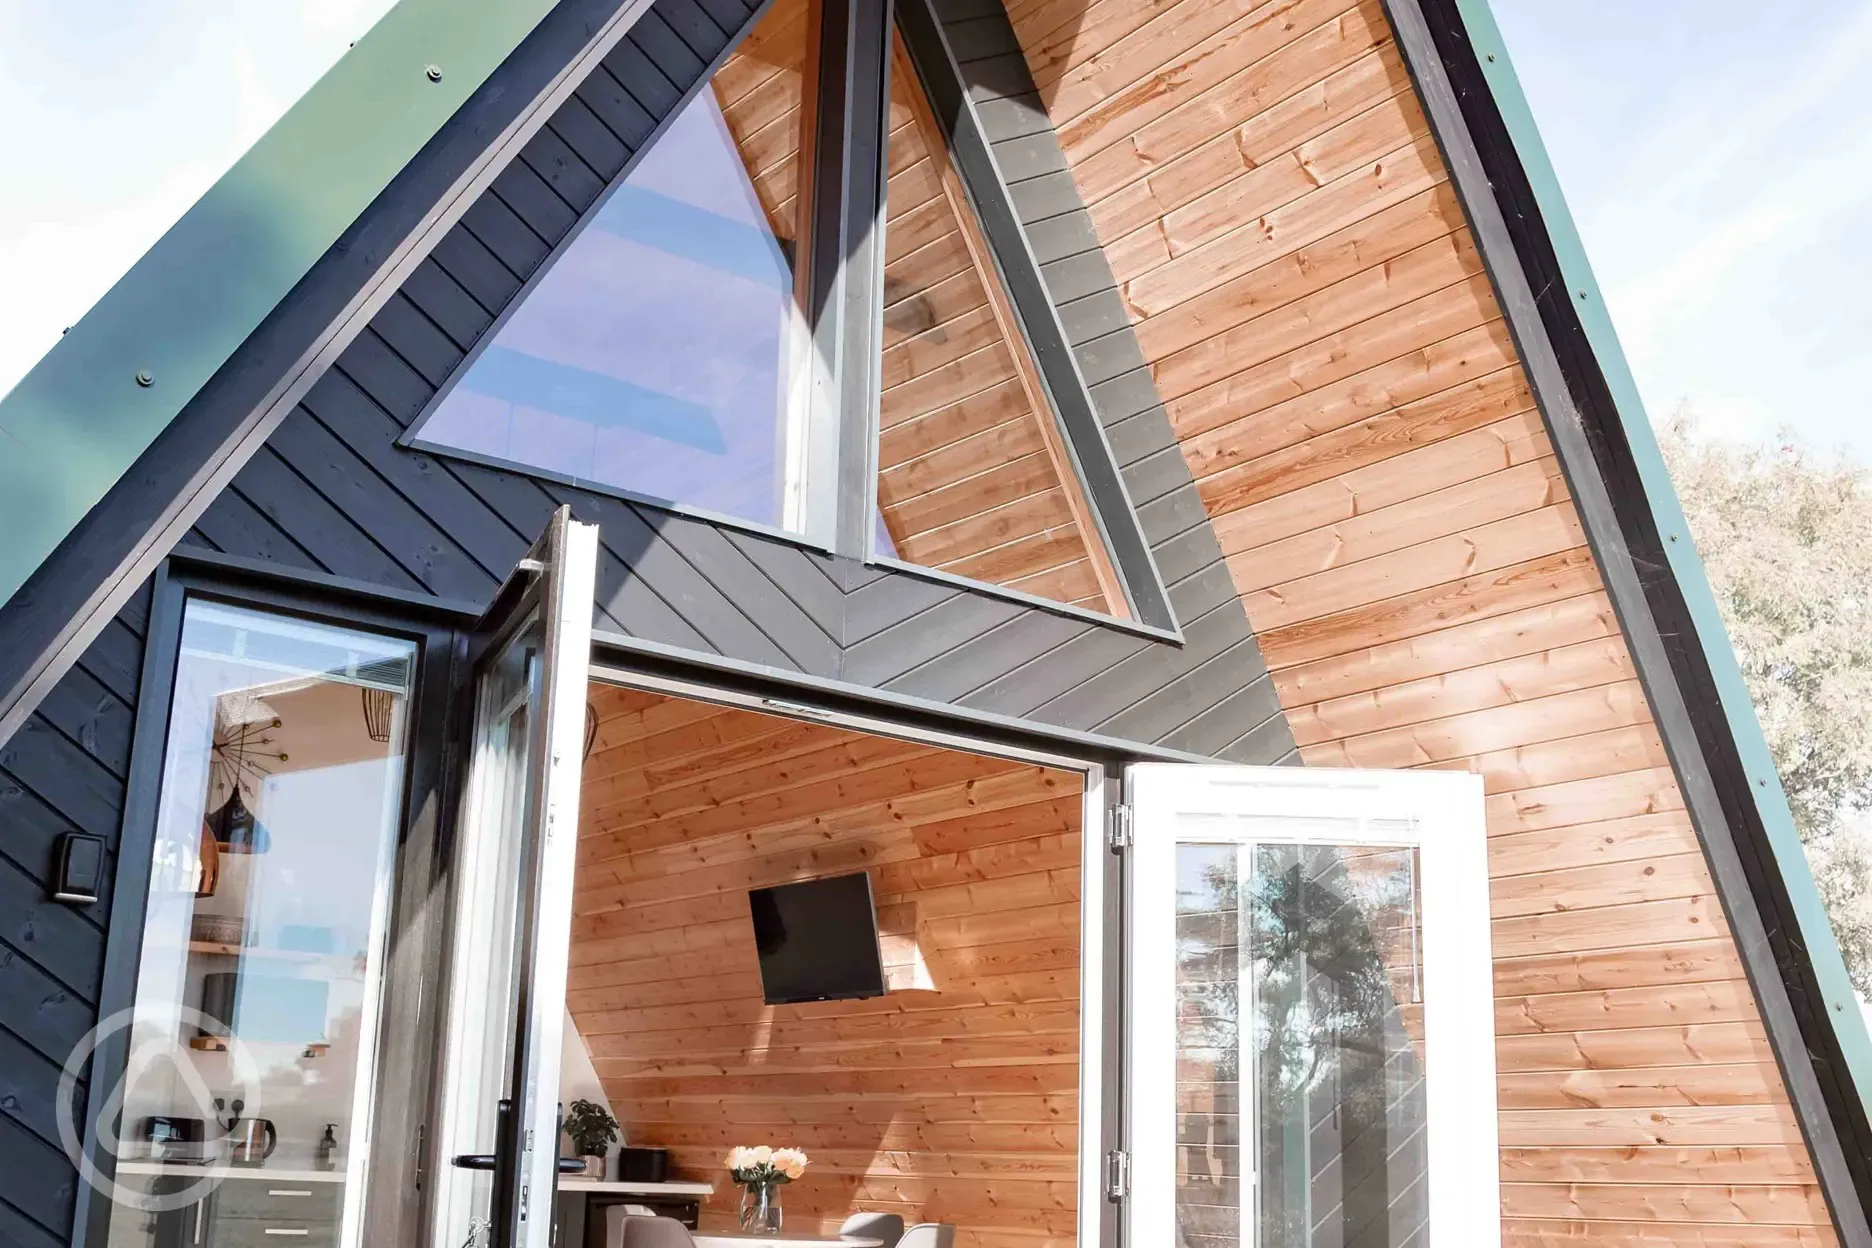 A-frame Glamping Cabin with all the comforts you would need